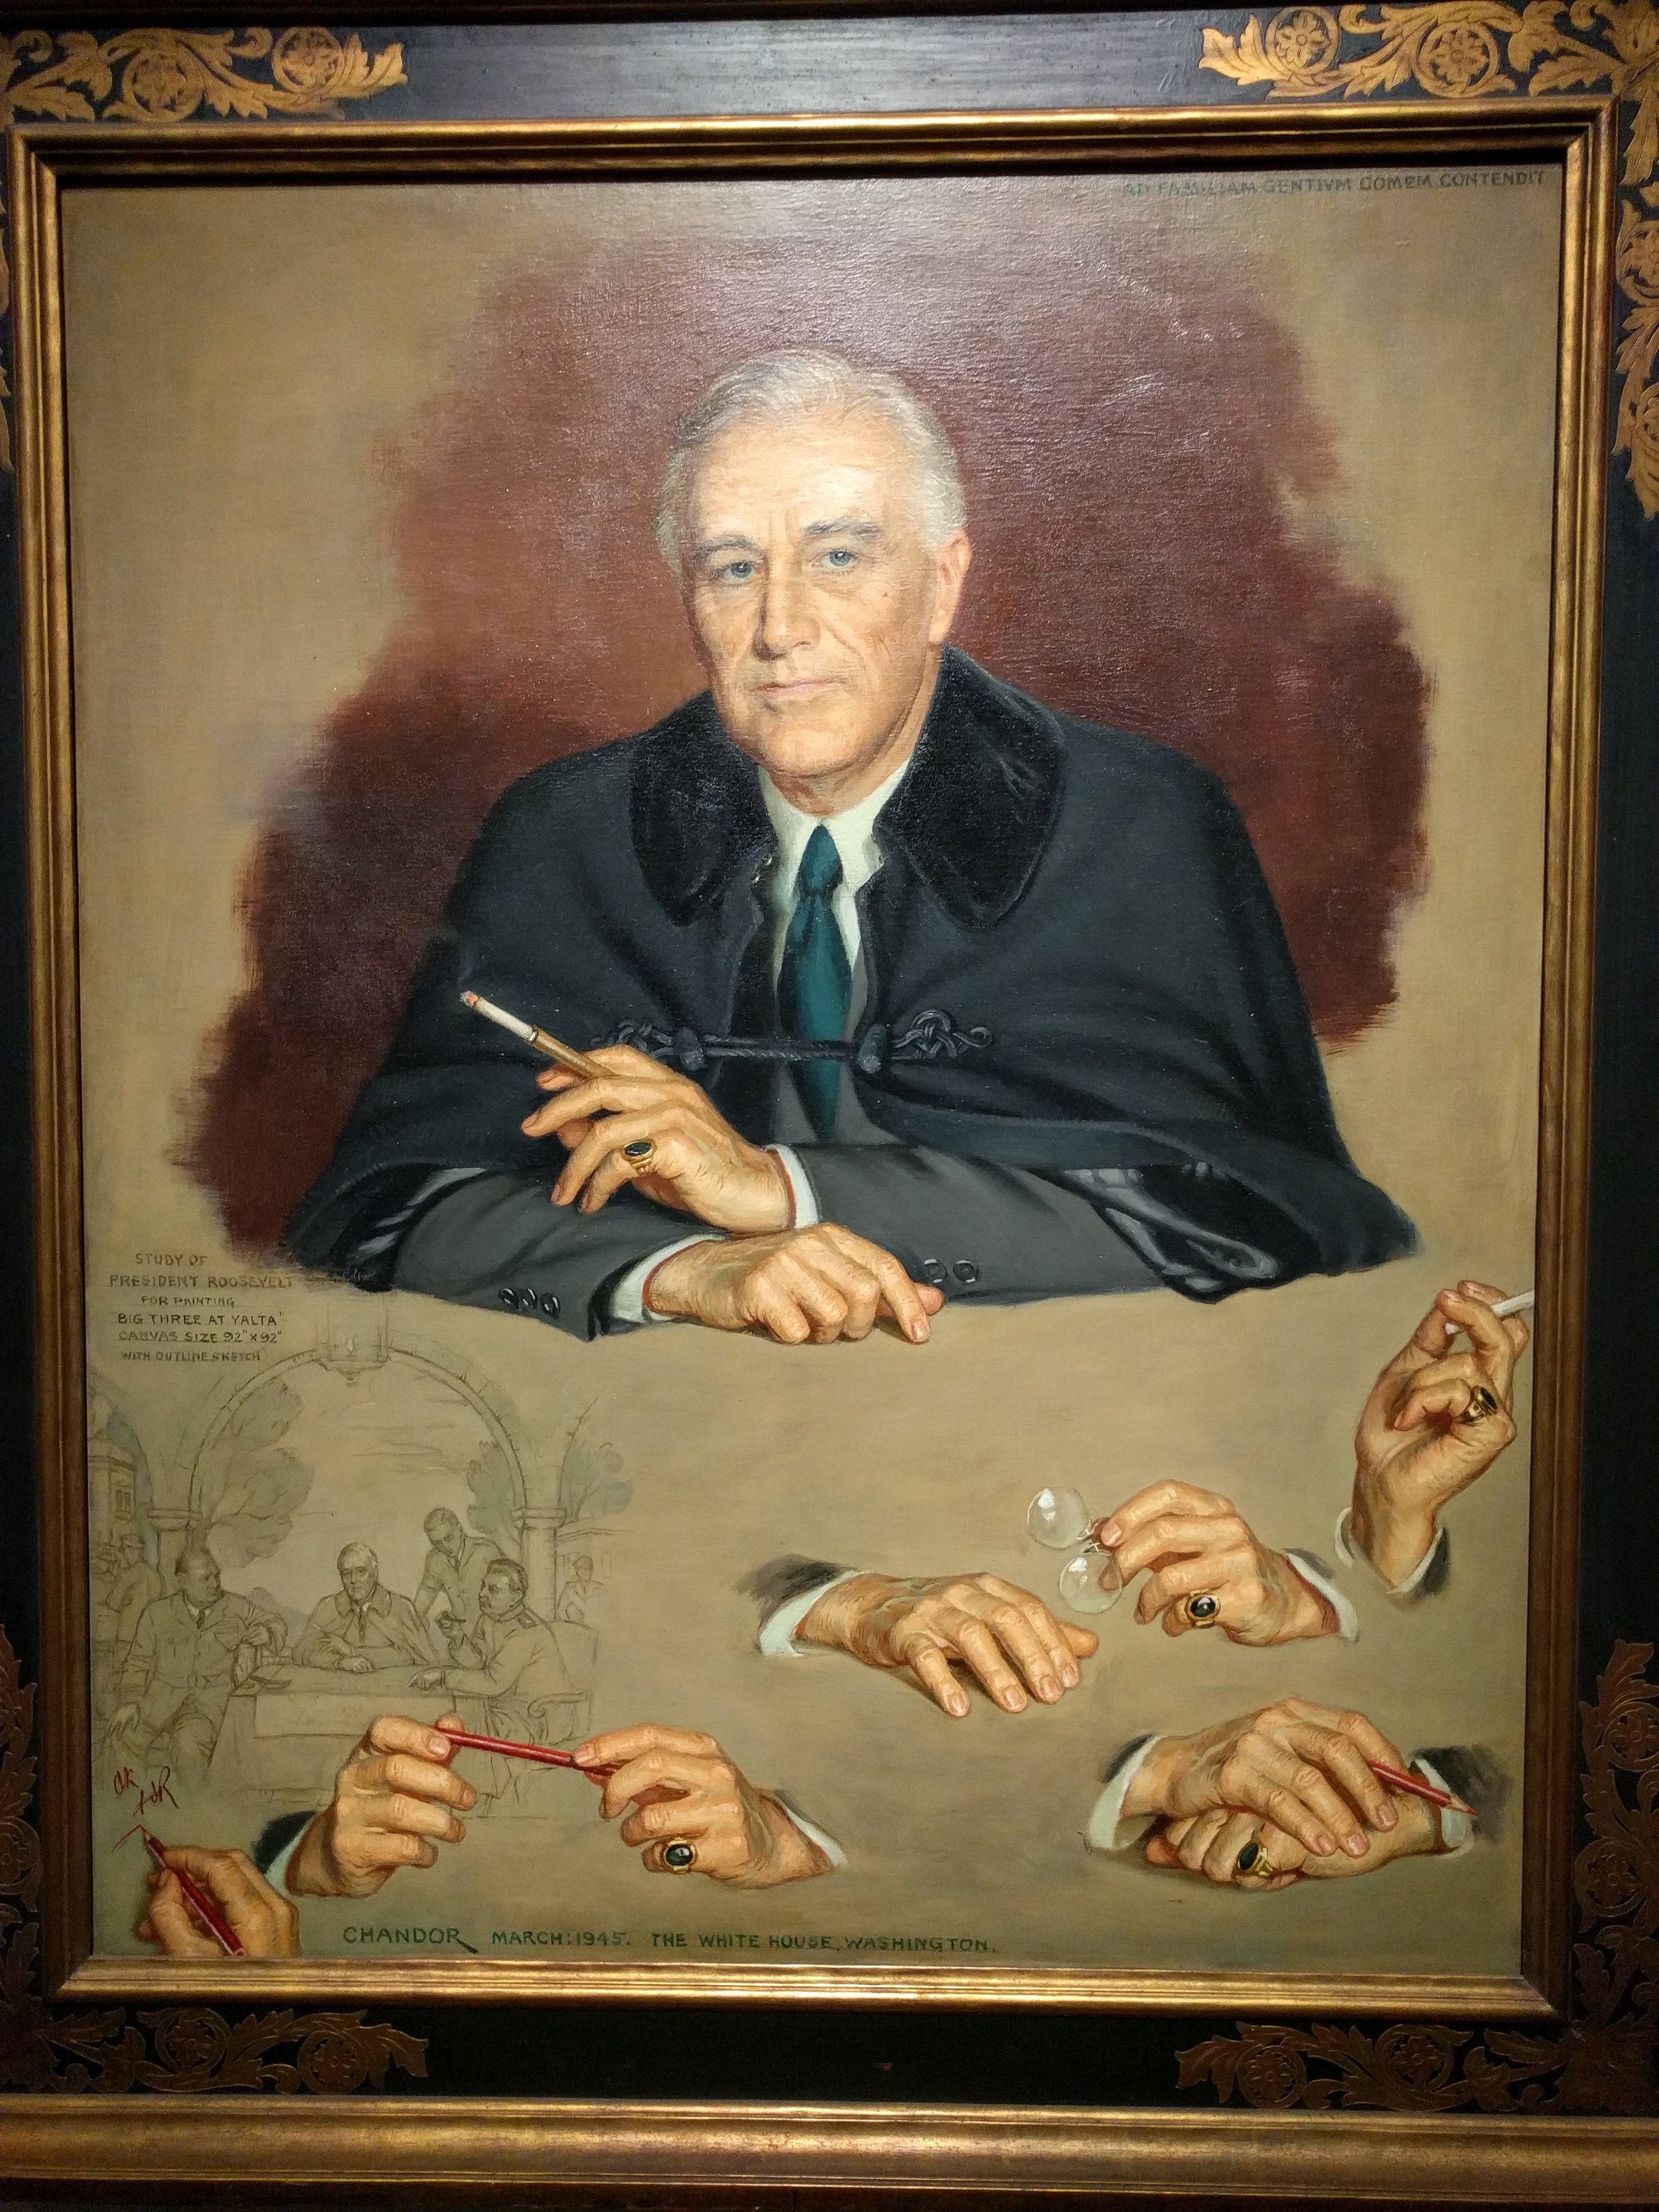  This was one of my favorite pieces because I’m mesmerized by the artist’s (John Christen Johansen) hand studies of President Woodrow Wilson 